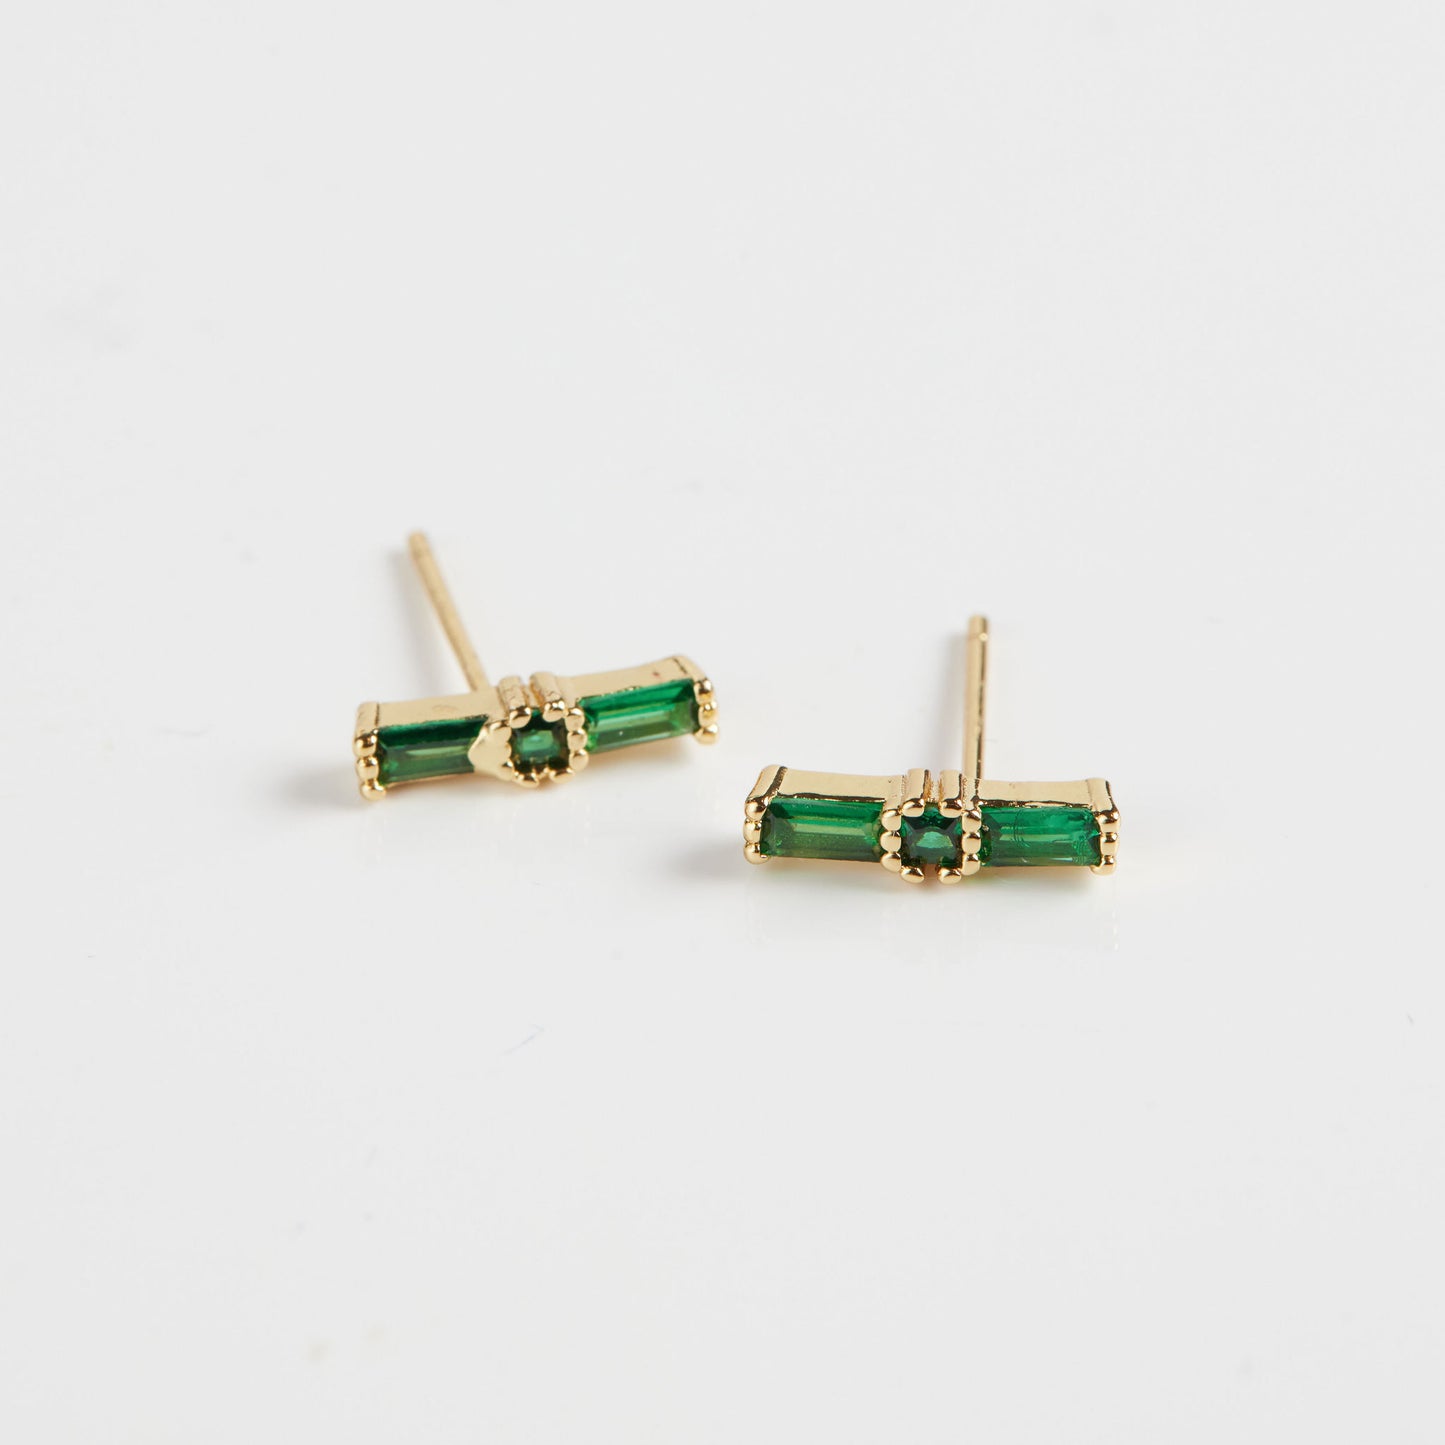 Emerald baguette studs on white background